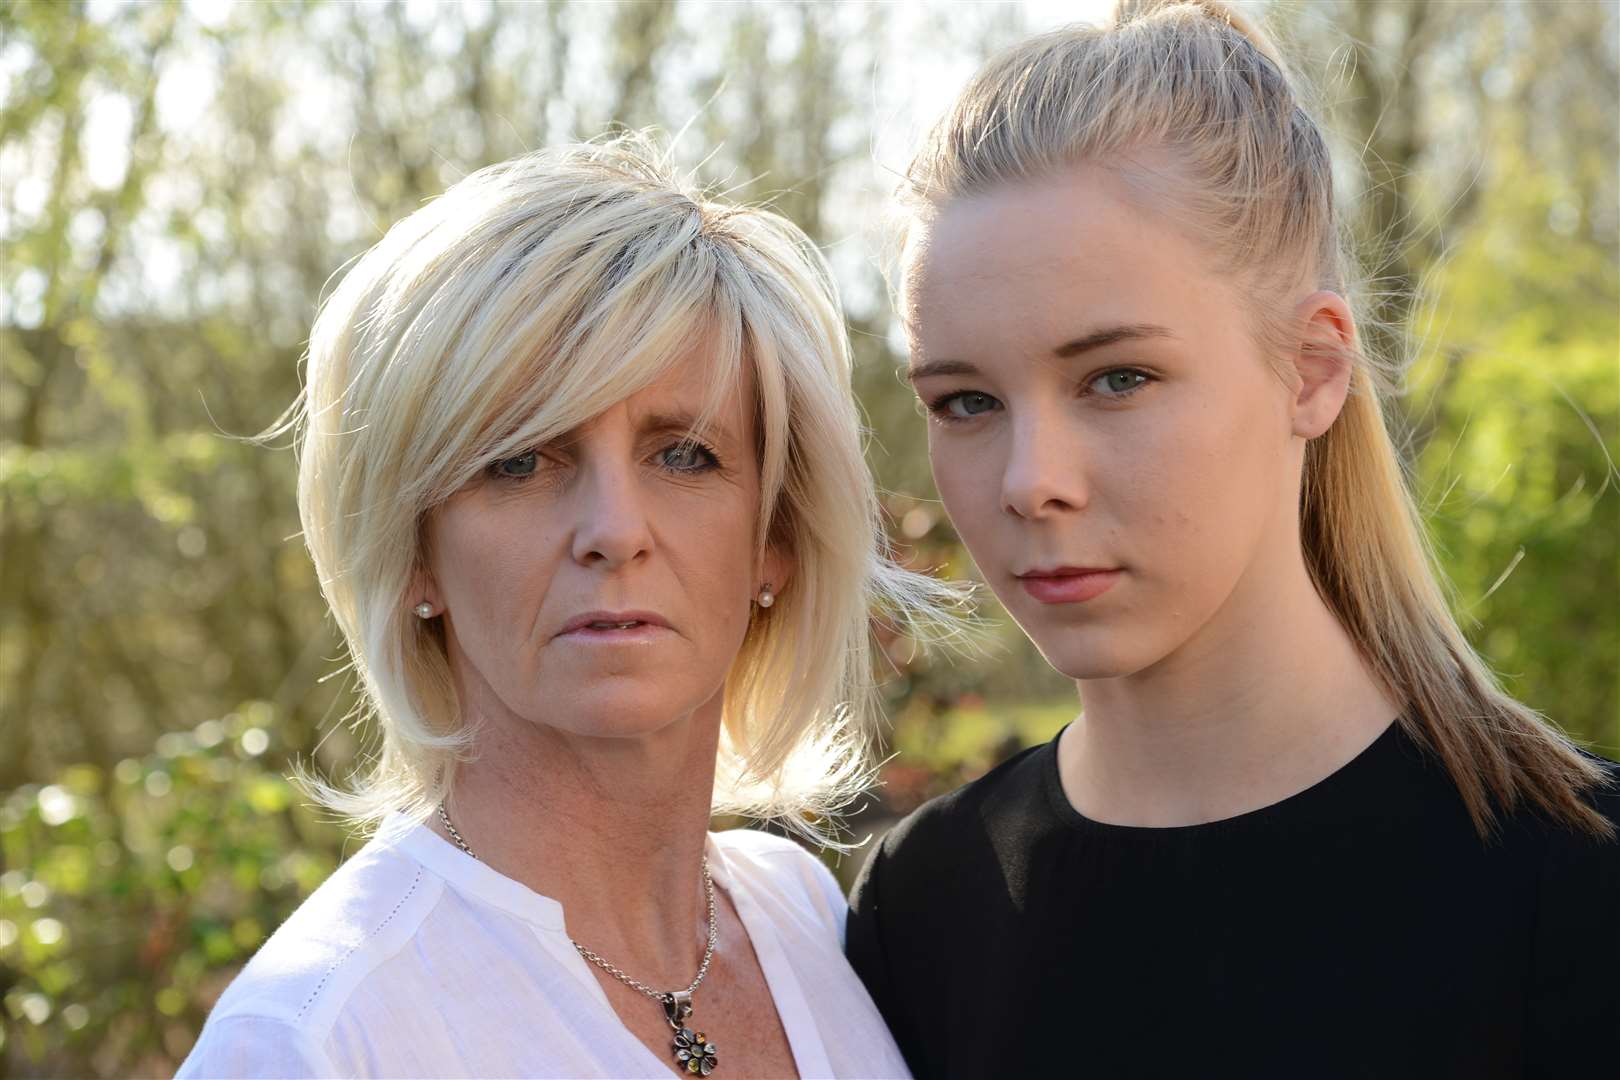 Susan Matthews and her daughter Kira, who went to the aid of the seriously injured motorcyclist